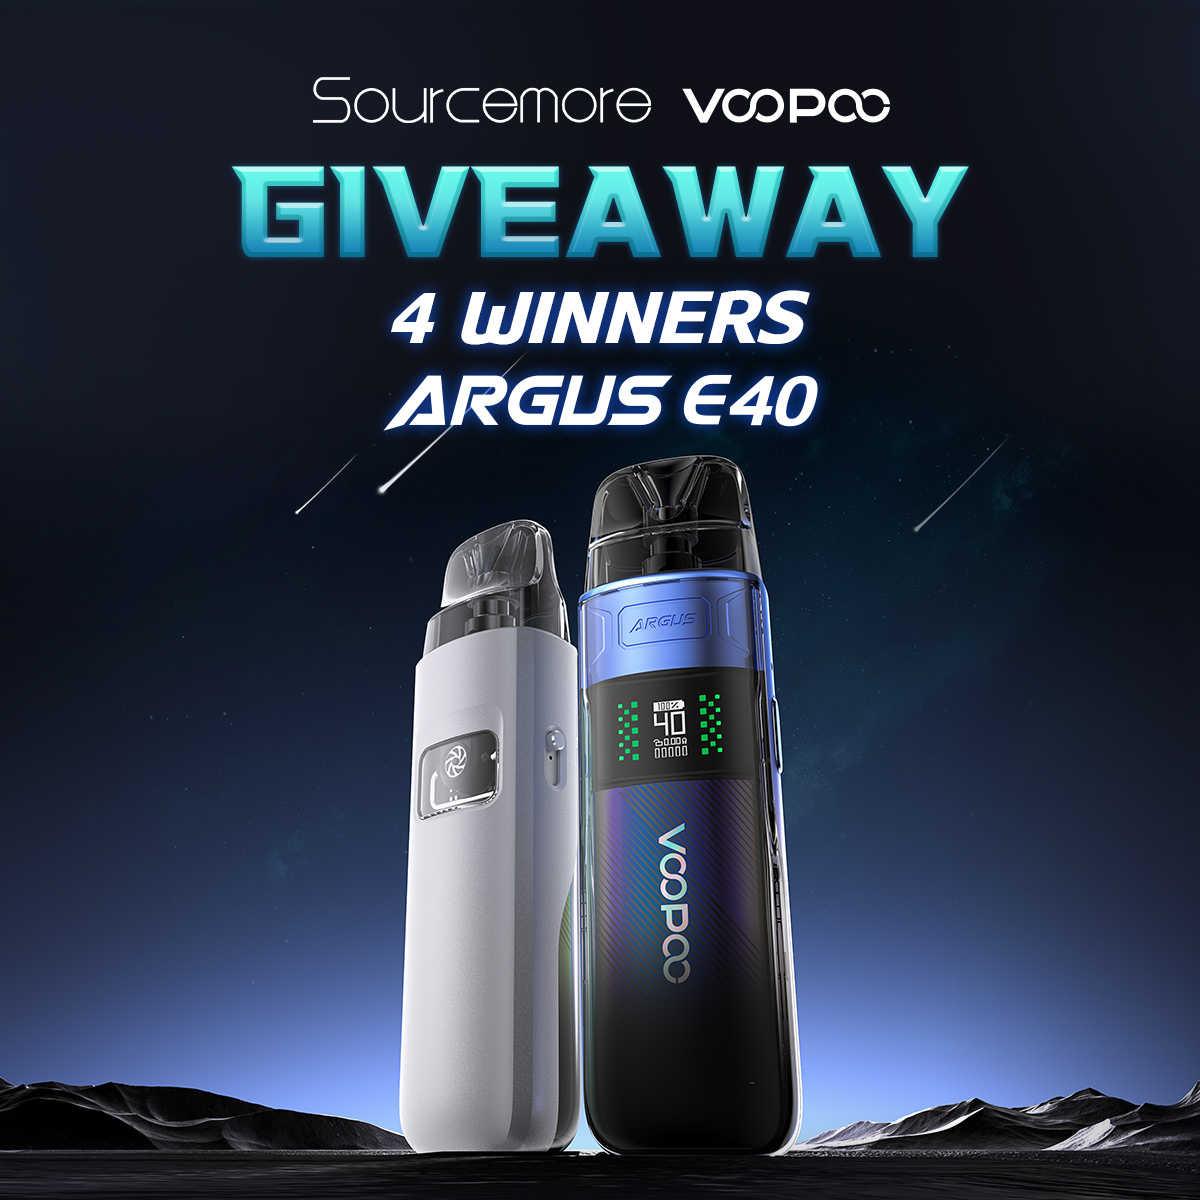 GIVEAWAY ALERT! 🔥 Here comes VOOPOO & Sourcemore Giveaway! VOOPOO Argus E40 Kit 😍 Terms & Conditions 👉sourcemore.com/voopoo-argus-e… Join in on the fun and you could be our lucky WINNER! 🏆 ⚠ Warning: The device contains addictive chemical nicotine. For Adult use only.